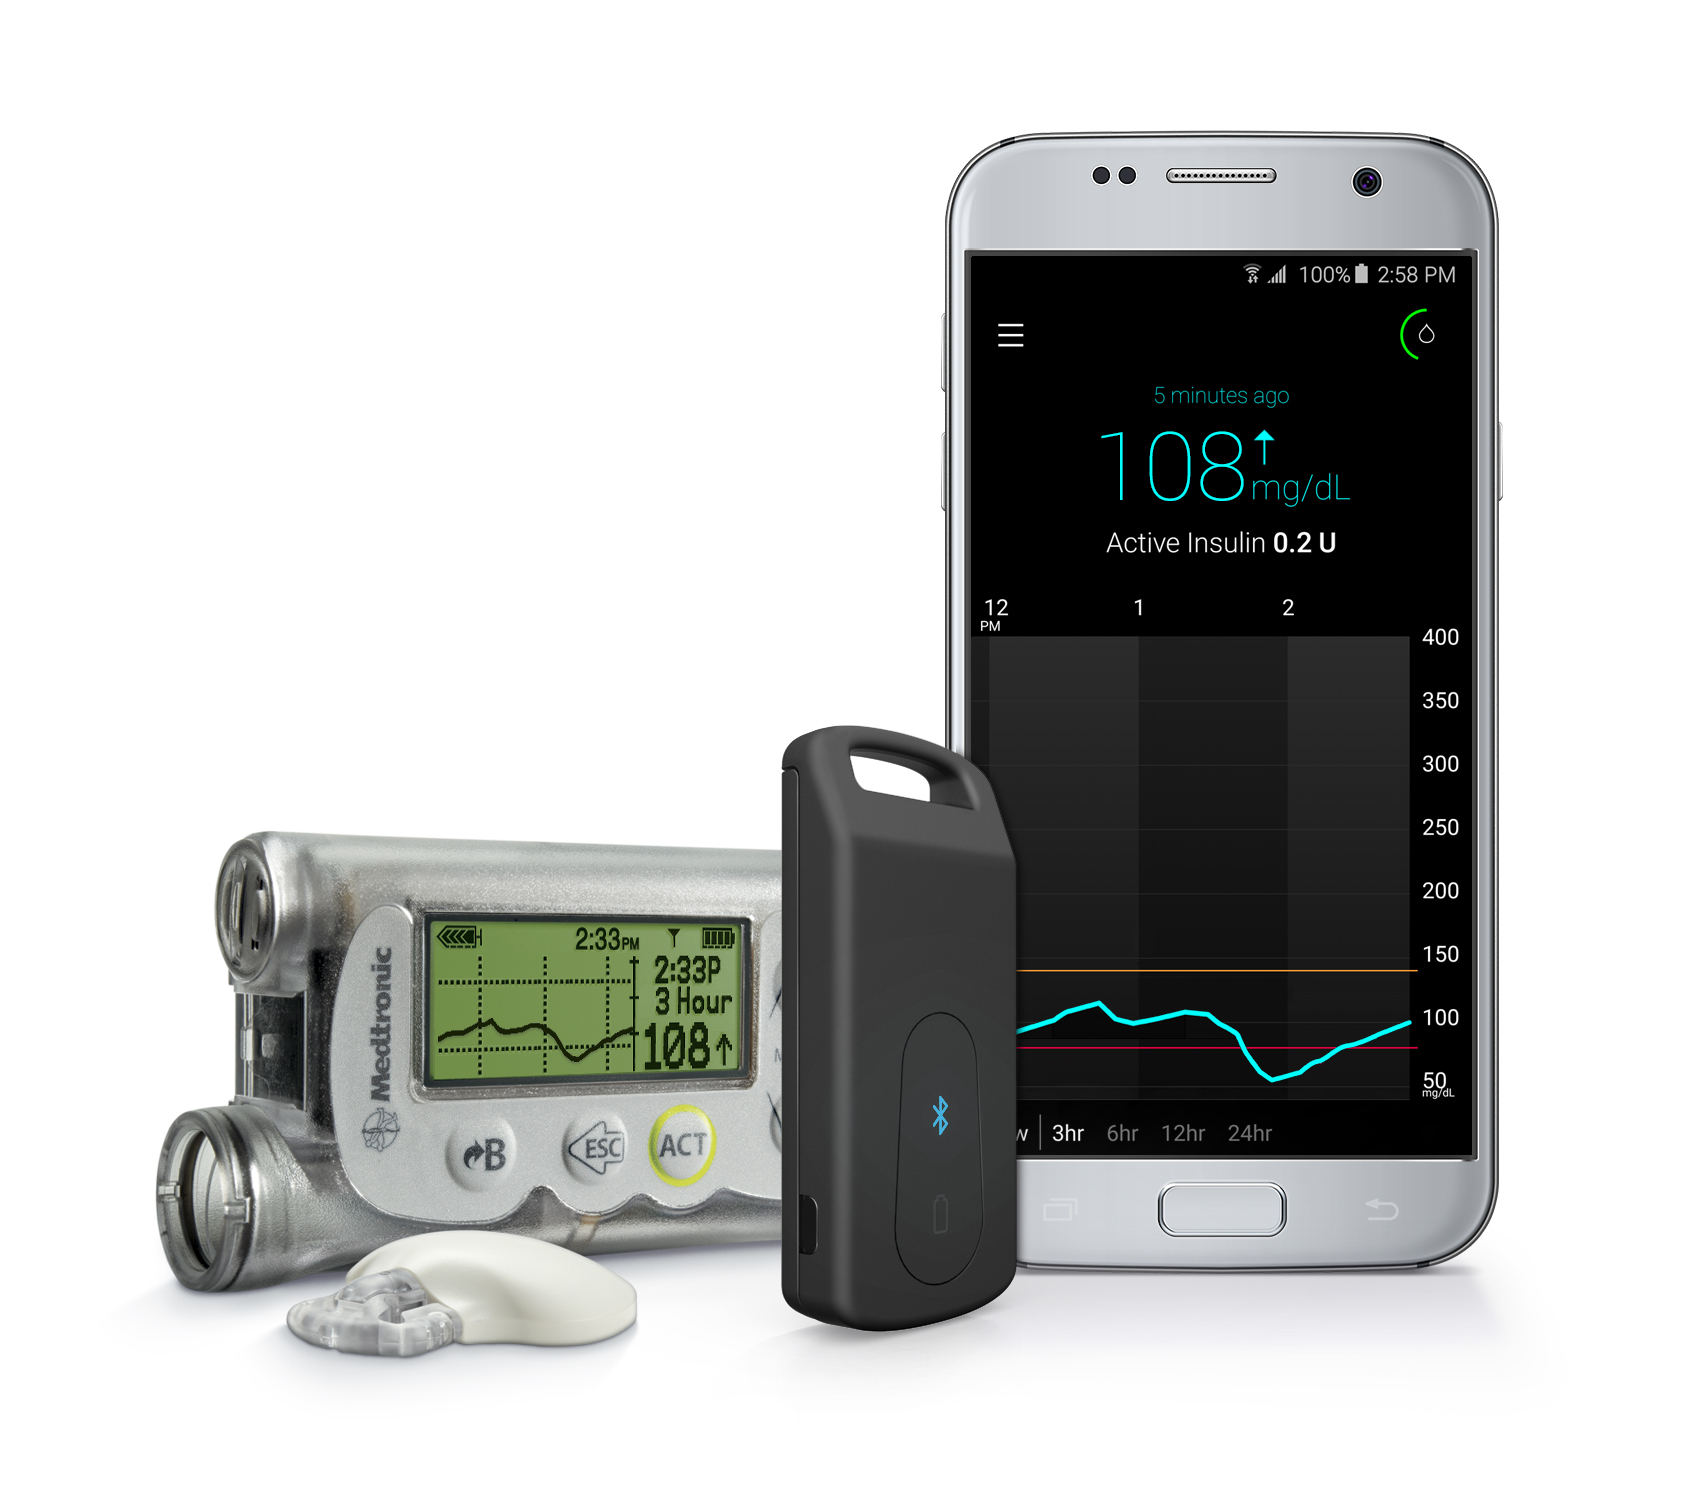 Medtronic announced U.S. commercial availability of its MiniMed Connect mobile accessory for Android